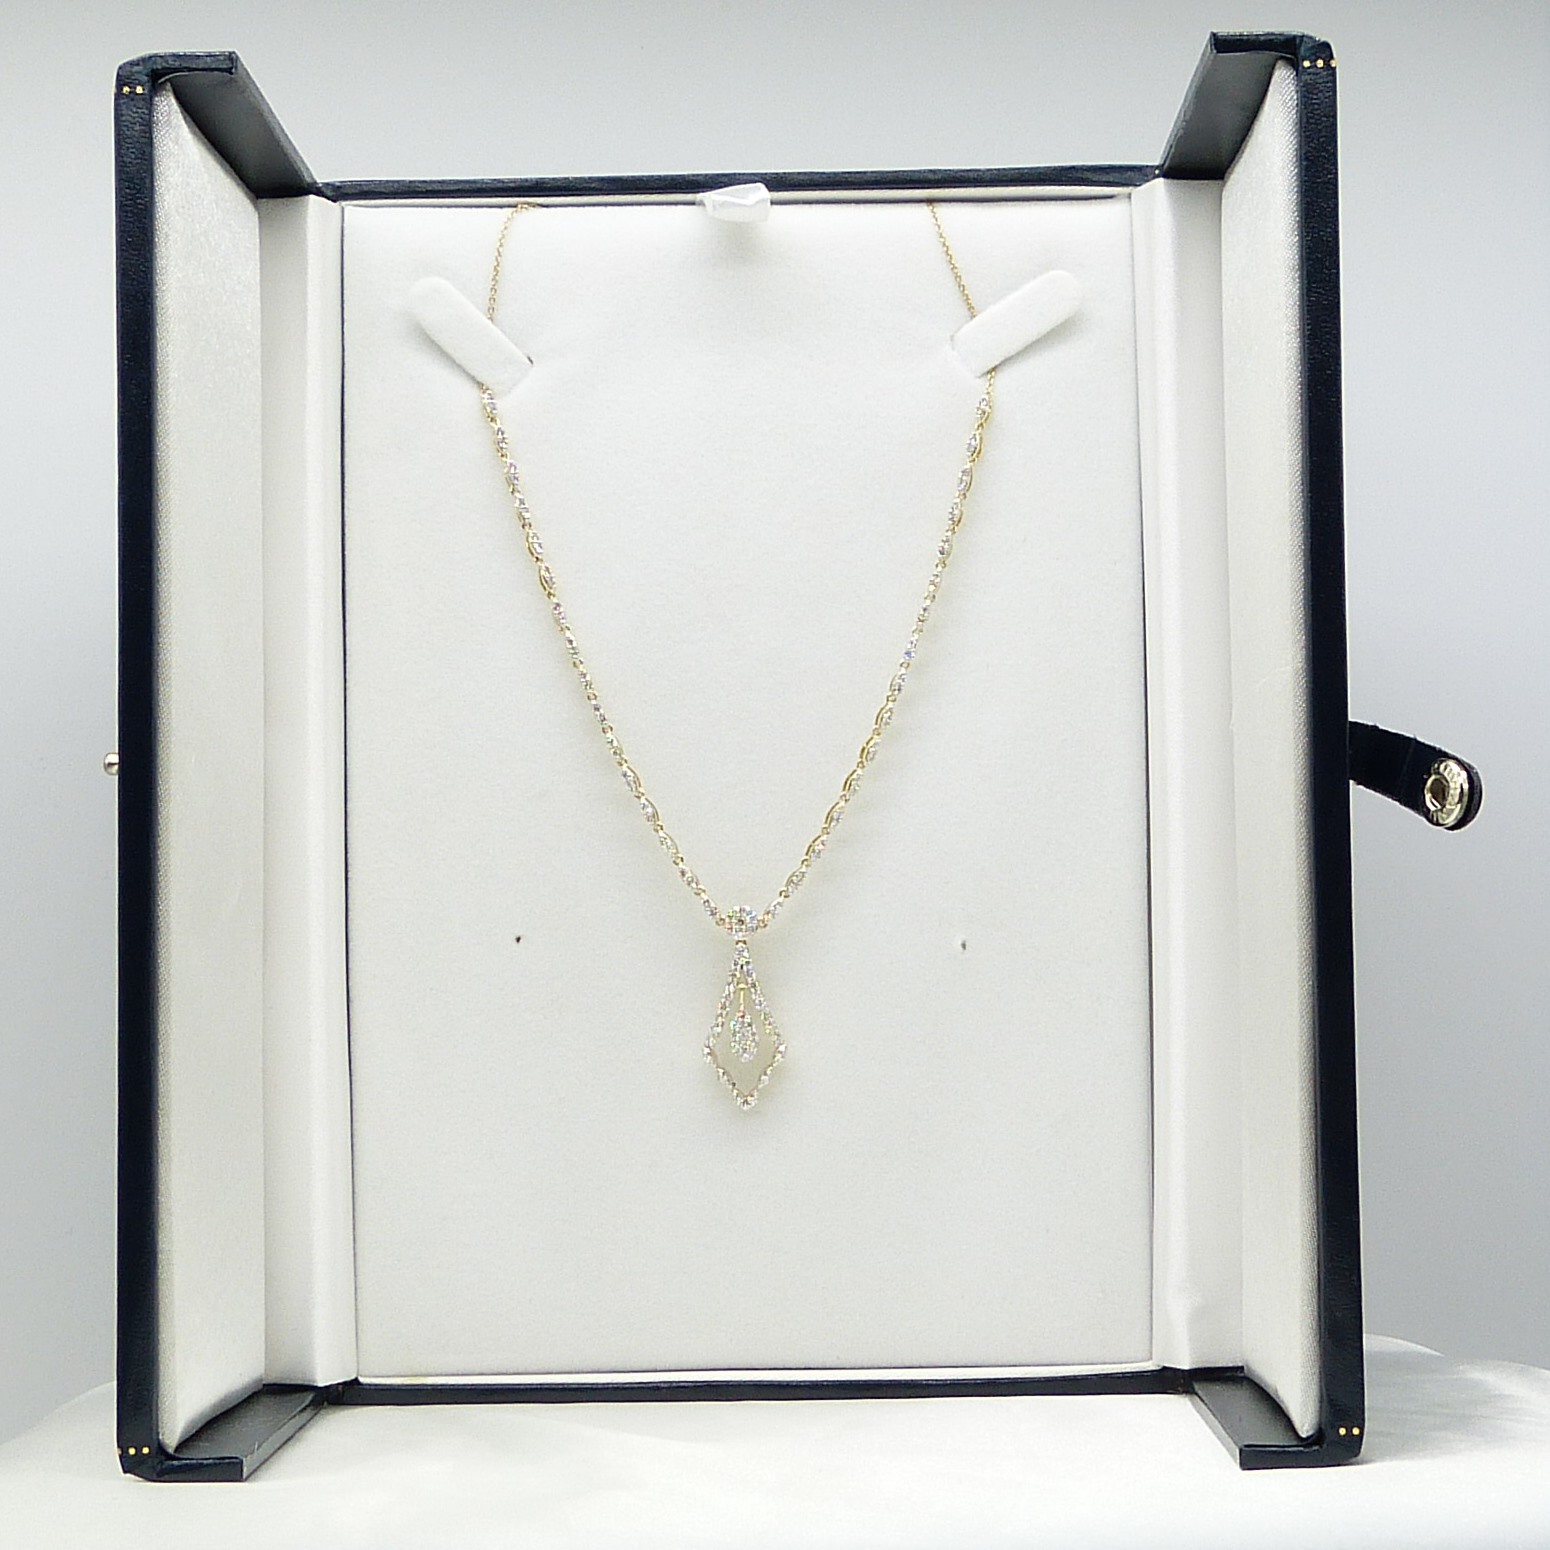 Exquisite Continental-Style Ornate 1.80 Carat Diamond-Set Necklace In 9ct Yellow Gold - Image 4 of 6